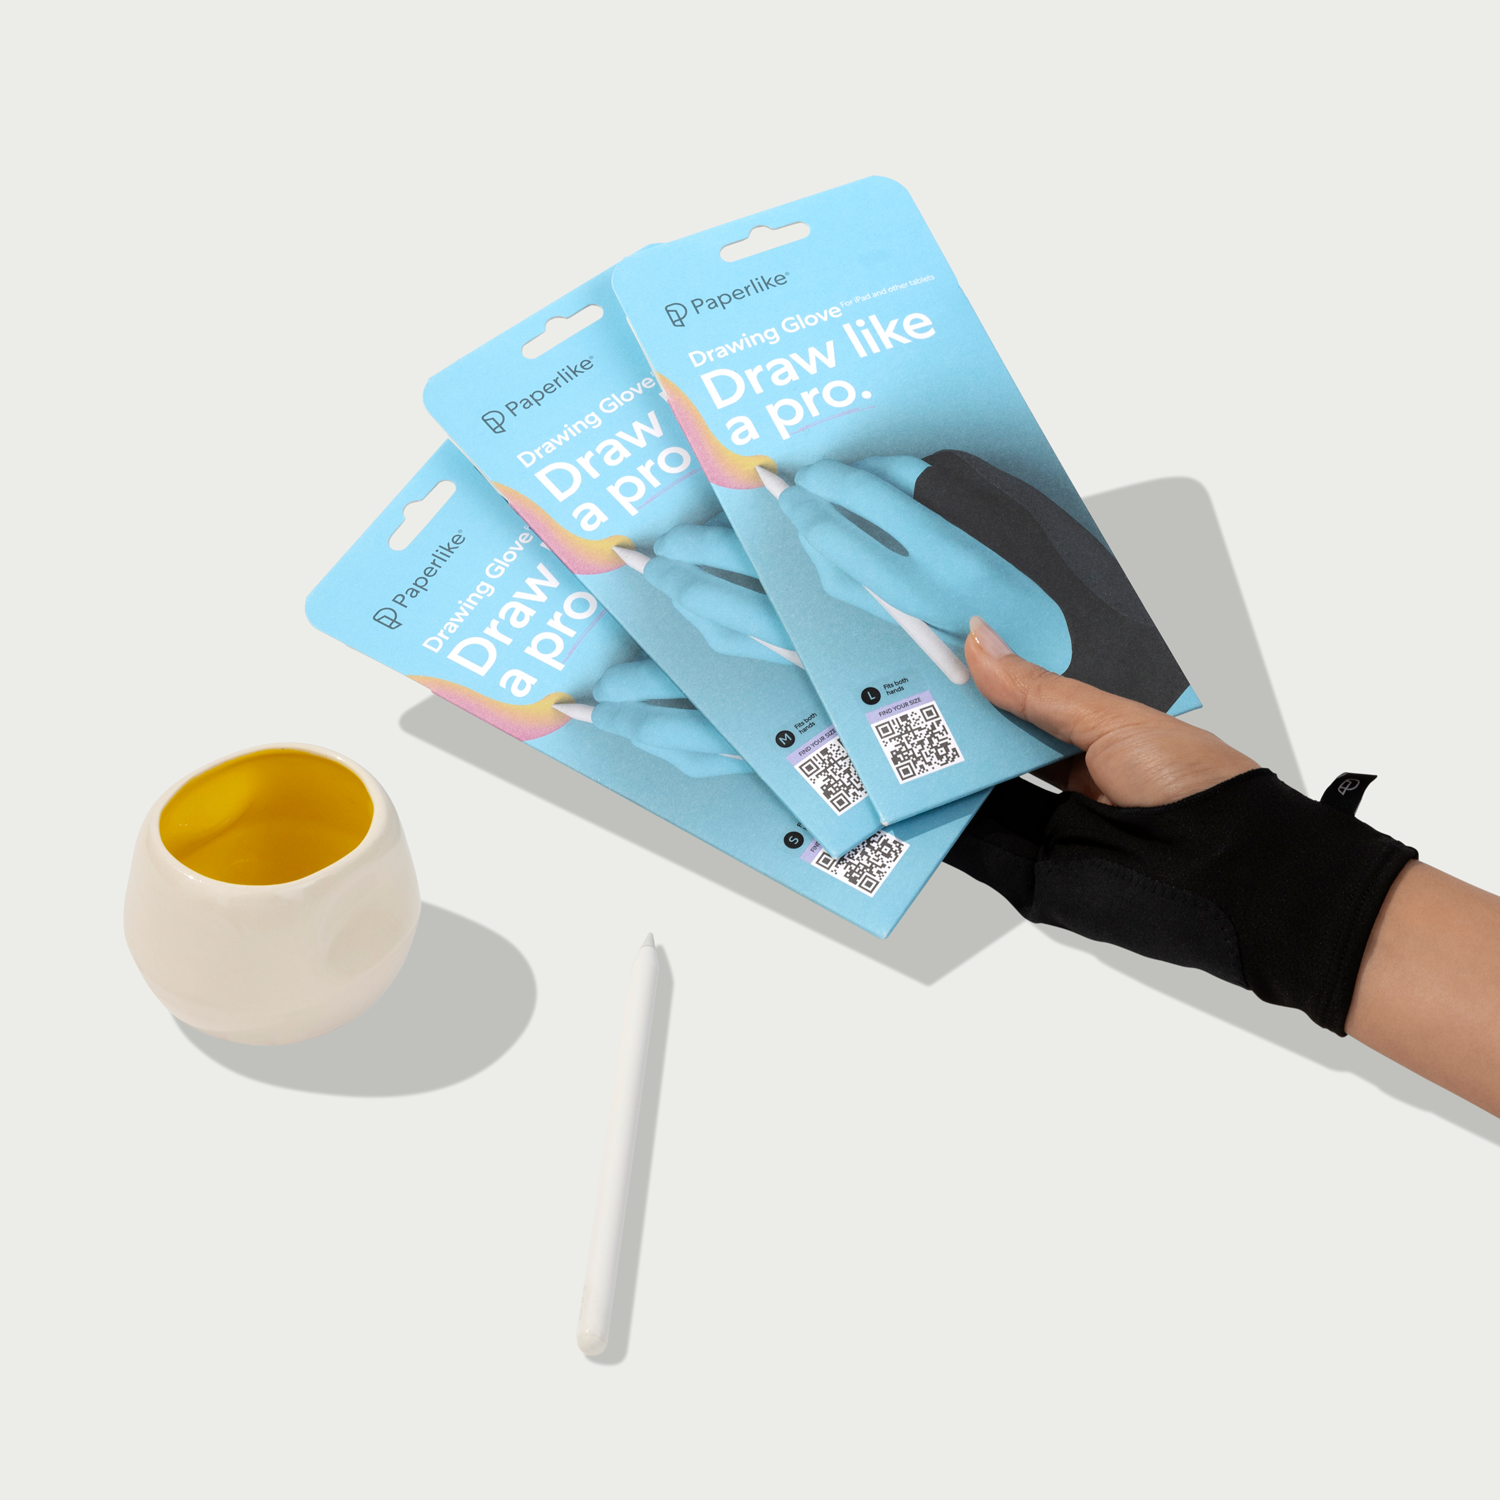 Paperlike's Drawing Glove comes in 3 sizes and fits both hands, unisex.